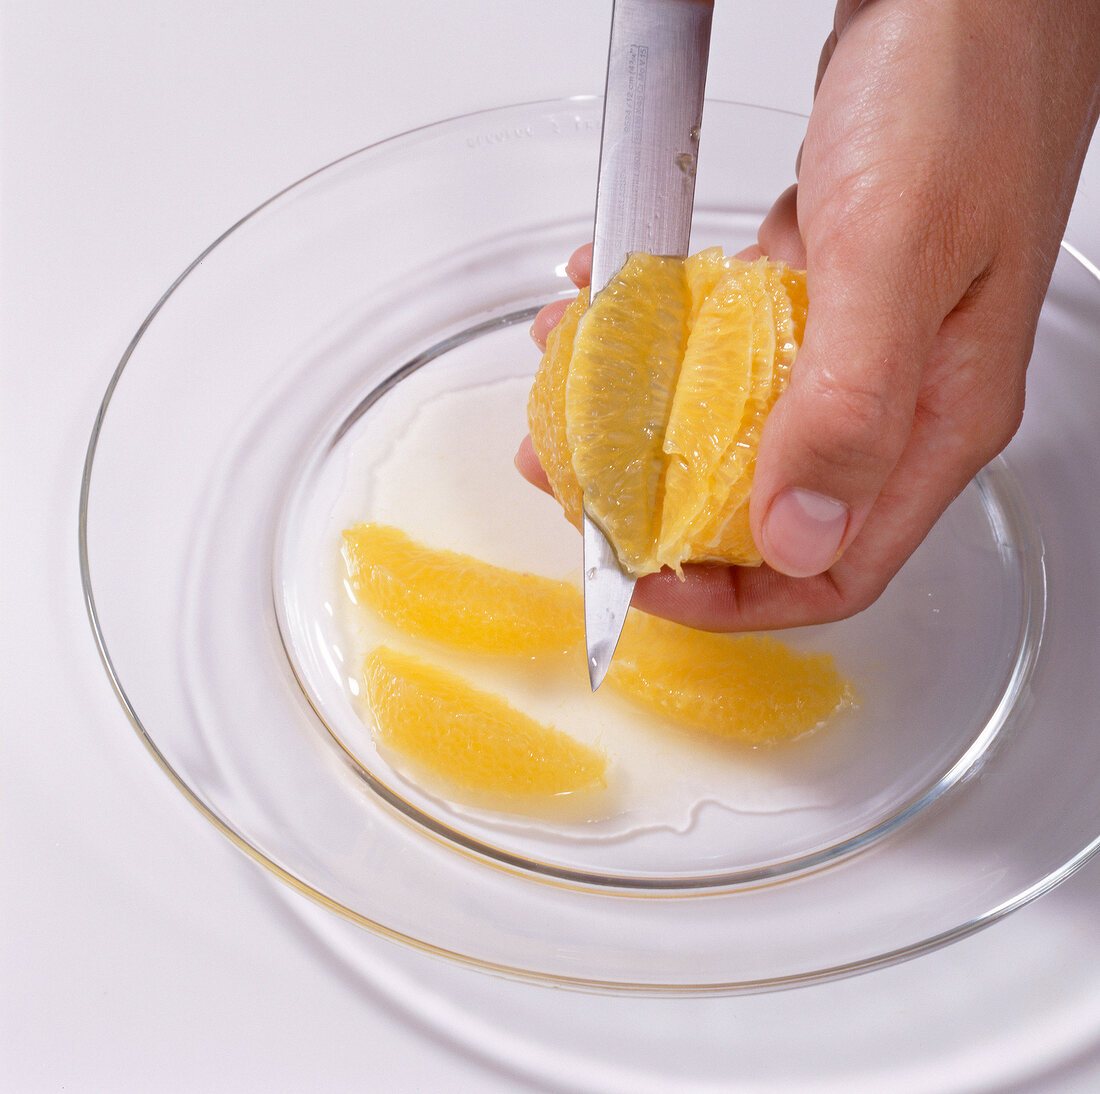 Hand slicing peeled orange with knife on glass plate